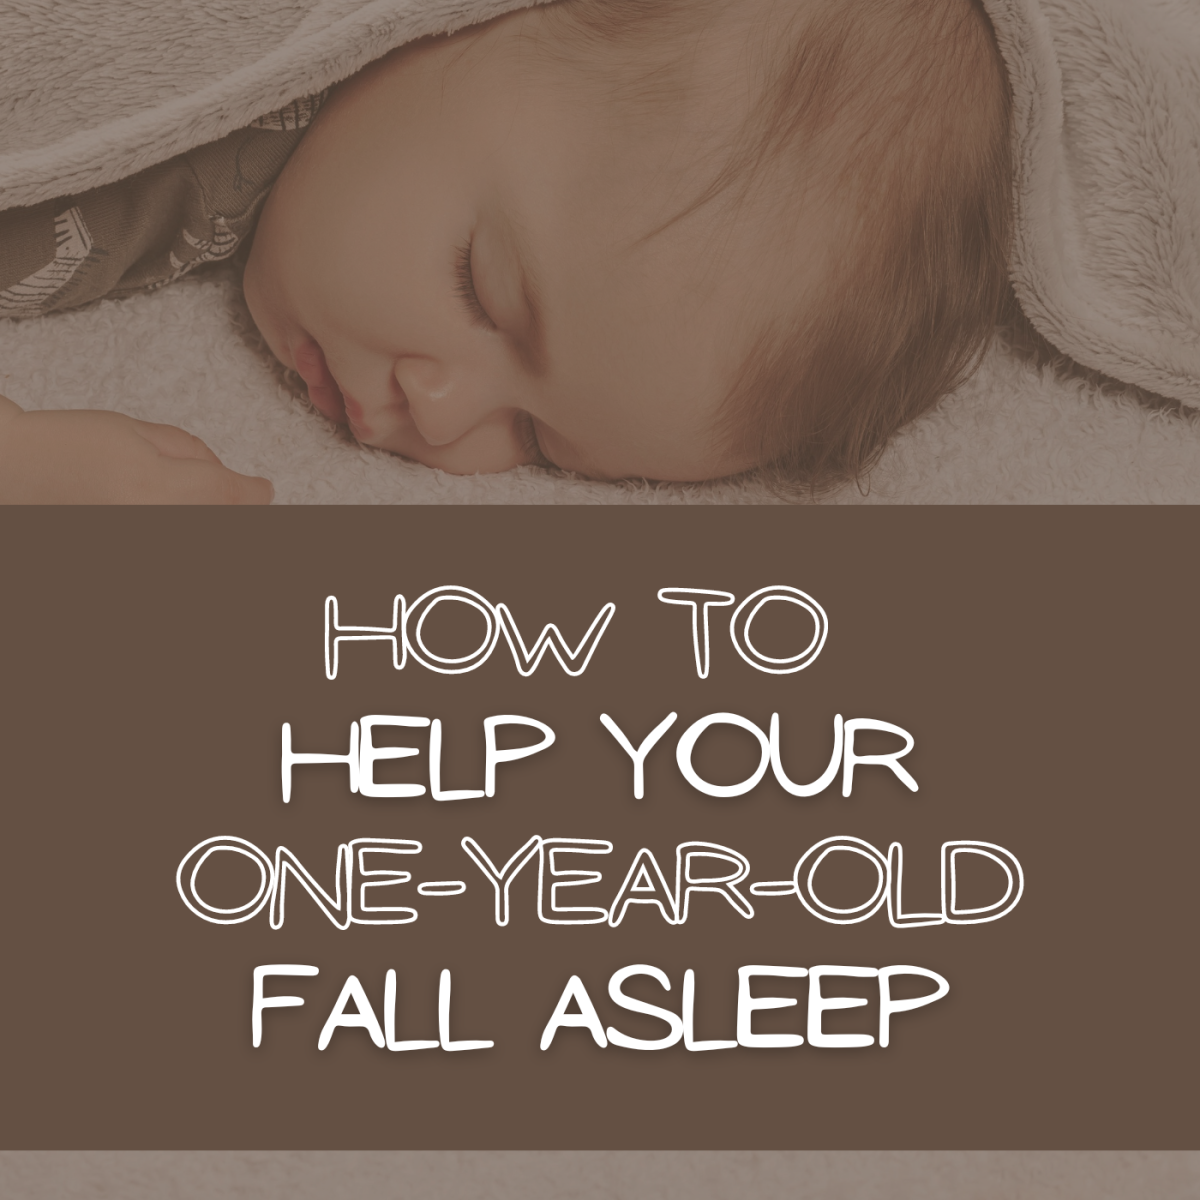 Helpful Tips on How to Get Your 1-Year-Old to Sleep